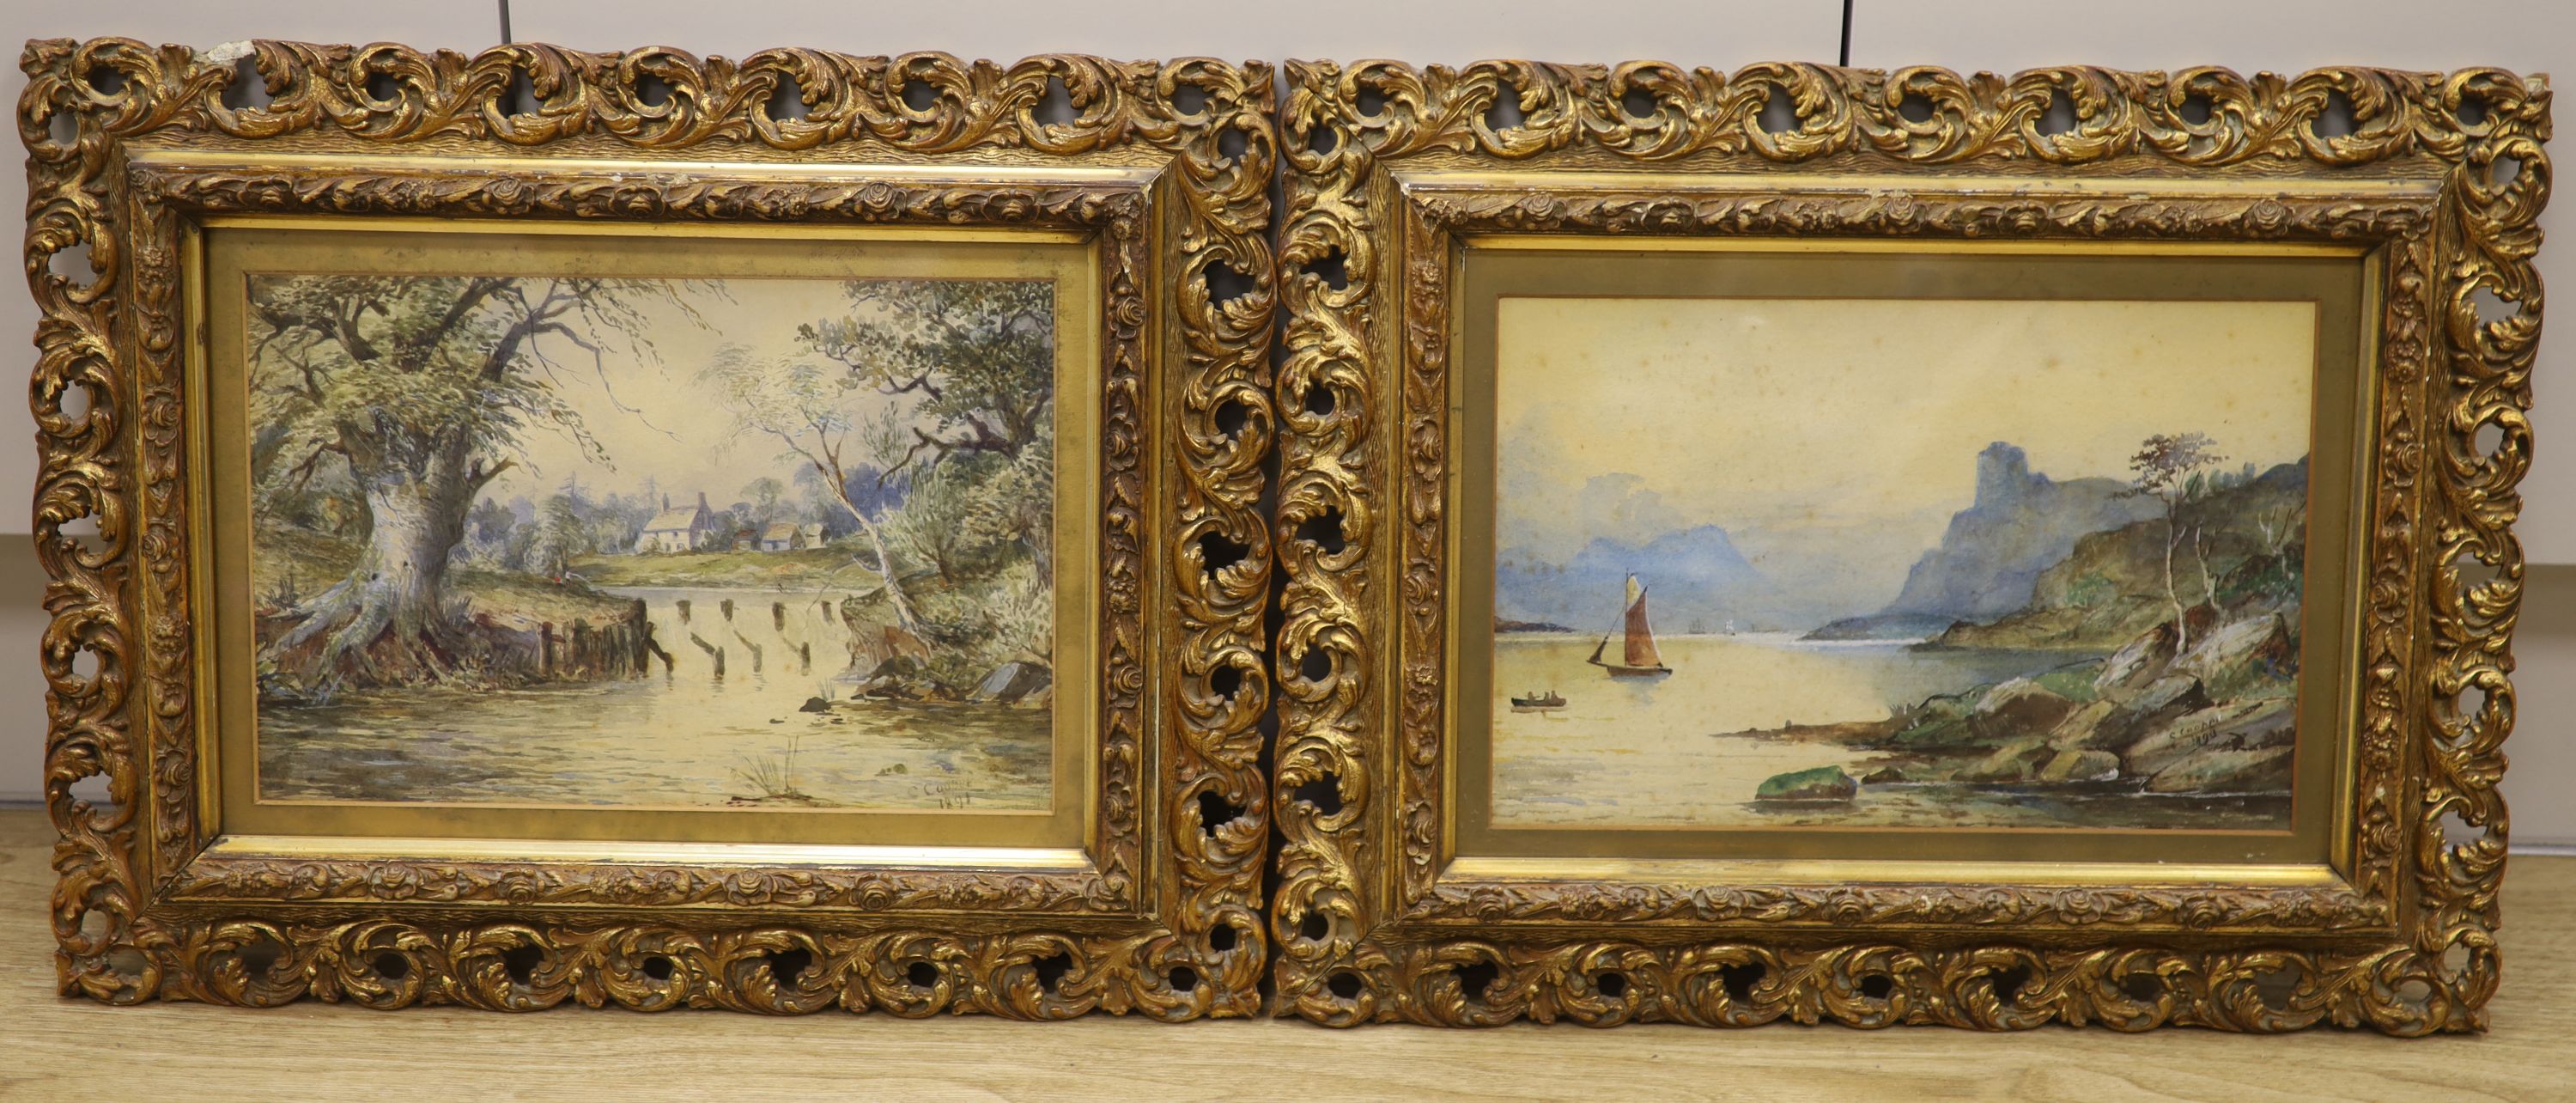 C. Cooper, pair of watercolours, Landscape with weir and Loch scene, signed and dated 1890, 20 x 30cm